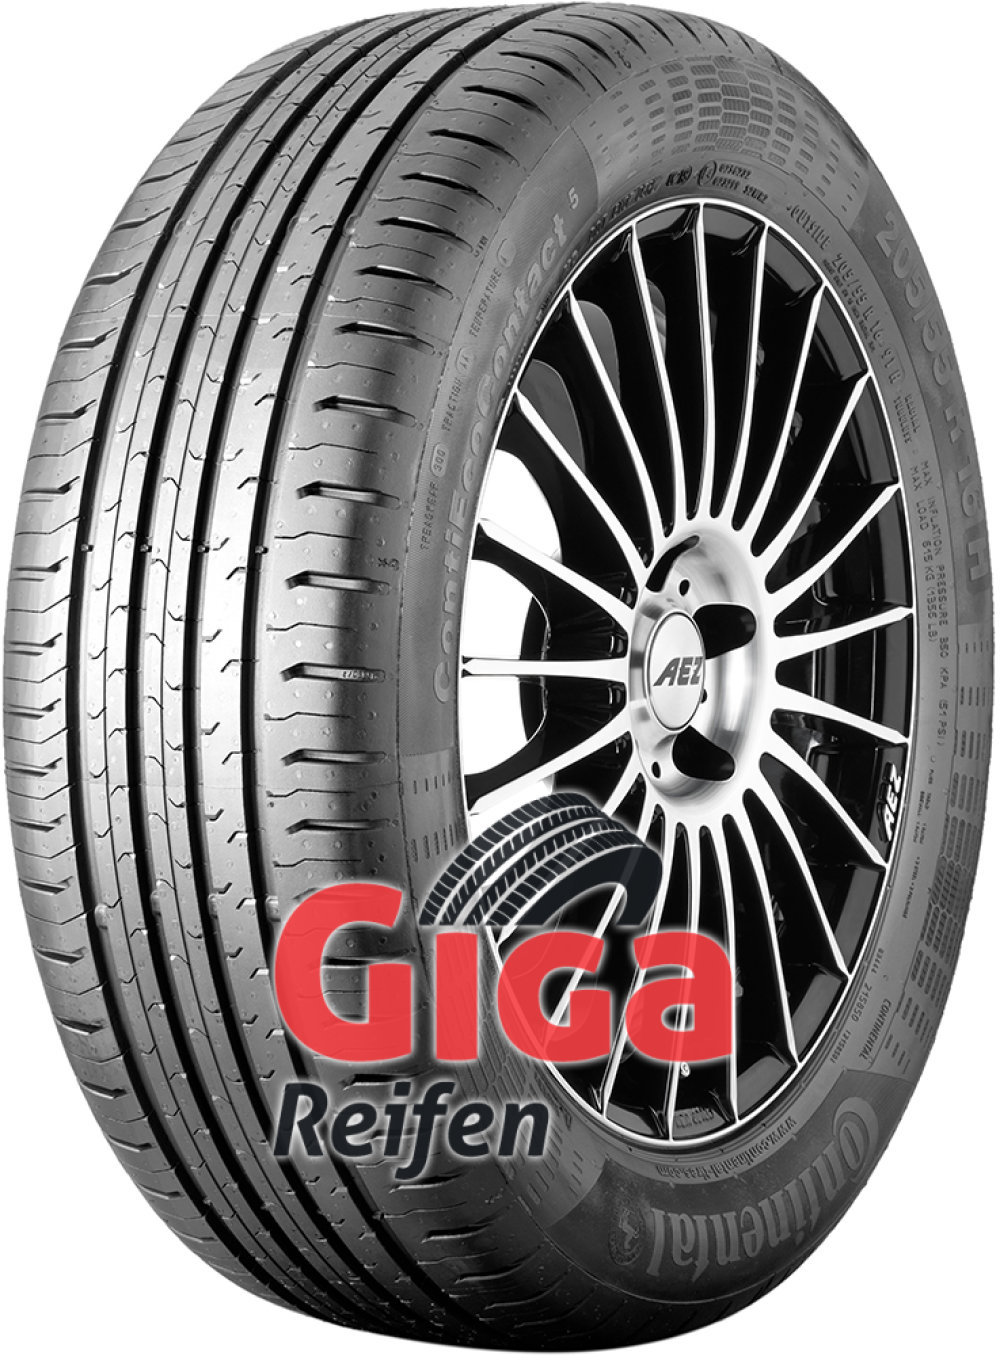 Continental ContiEcoContact 5 ( 165/65 R14 83T XL ) von Continental